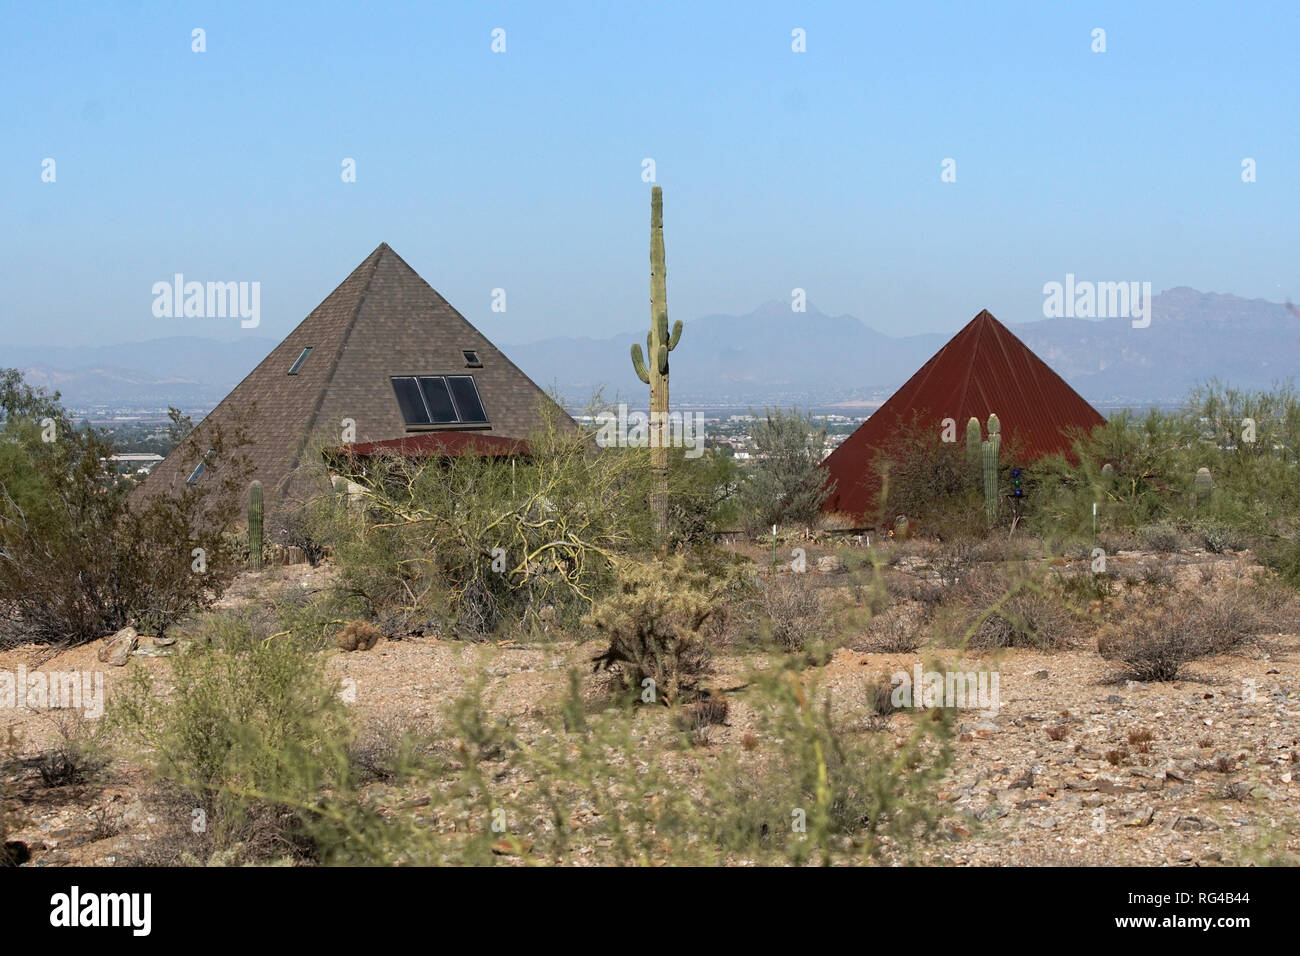 In the desert outside of Phoenix, Arizona a house is built in the shape of a pyramid. Stock Photo